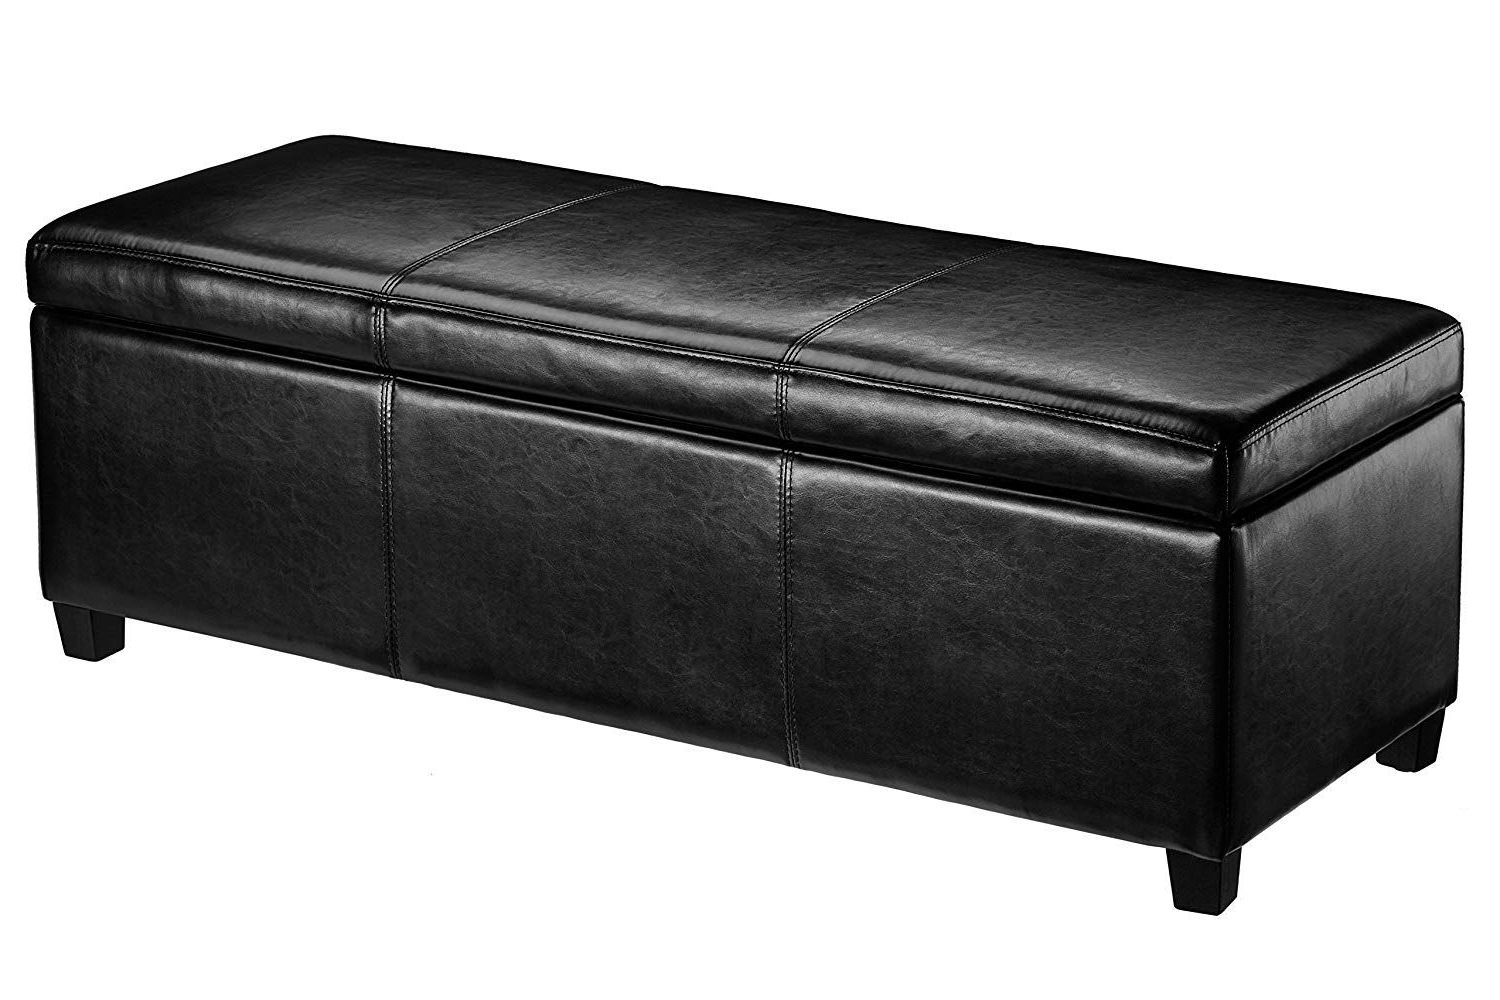 Preferred First Hill Madison Rectangular Faux Leather Storage Ottoman Bench Regarding Black Faux Leather Ottomans With Pull Tab (View 5 of 10)